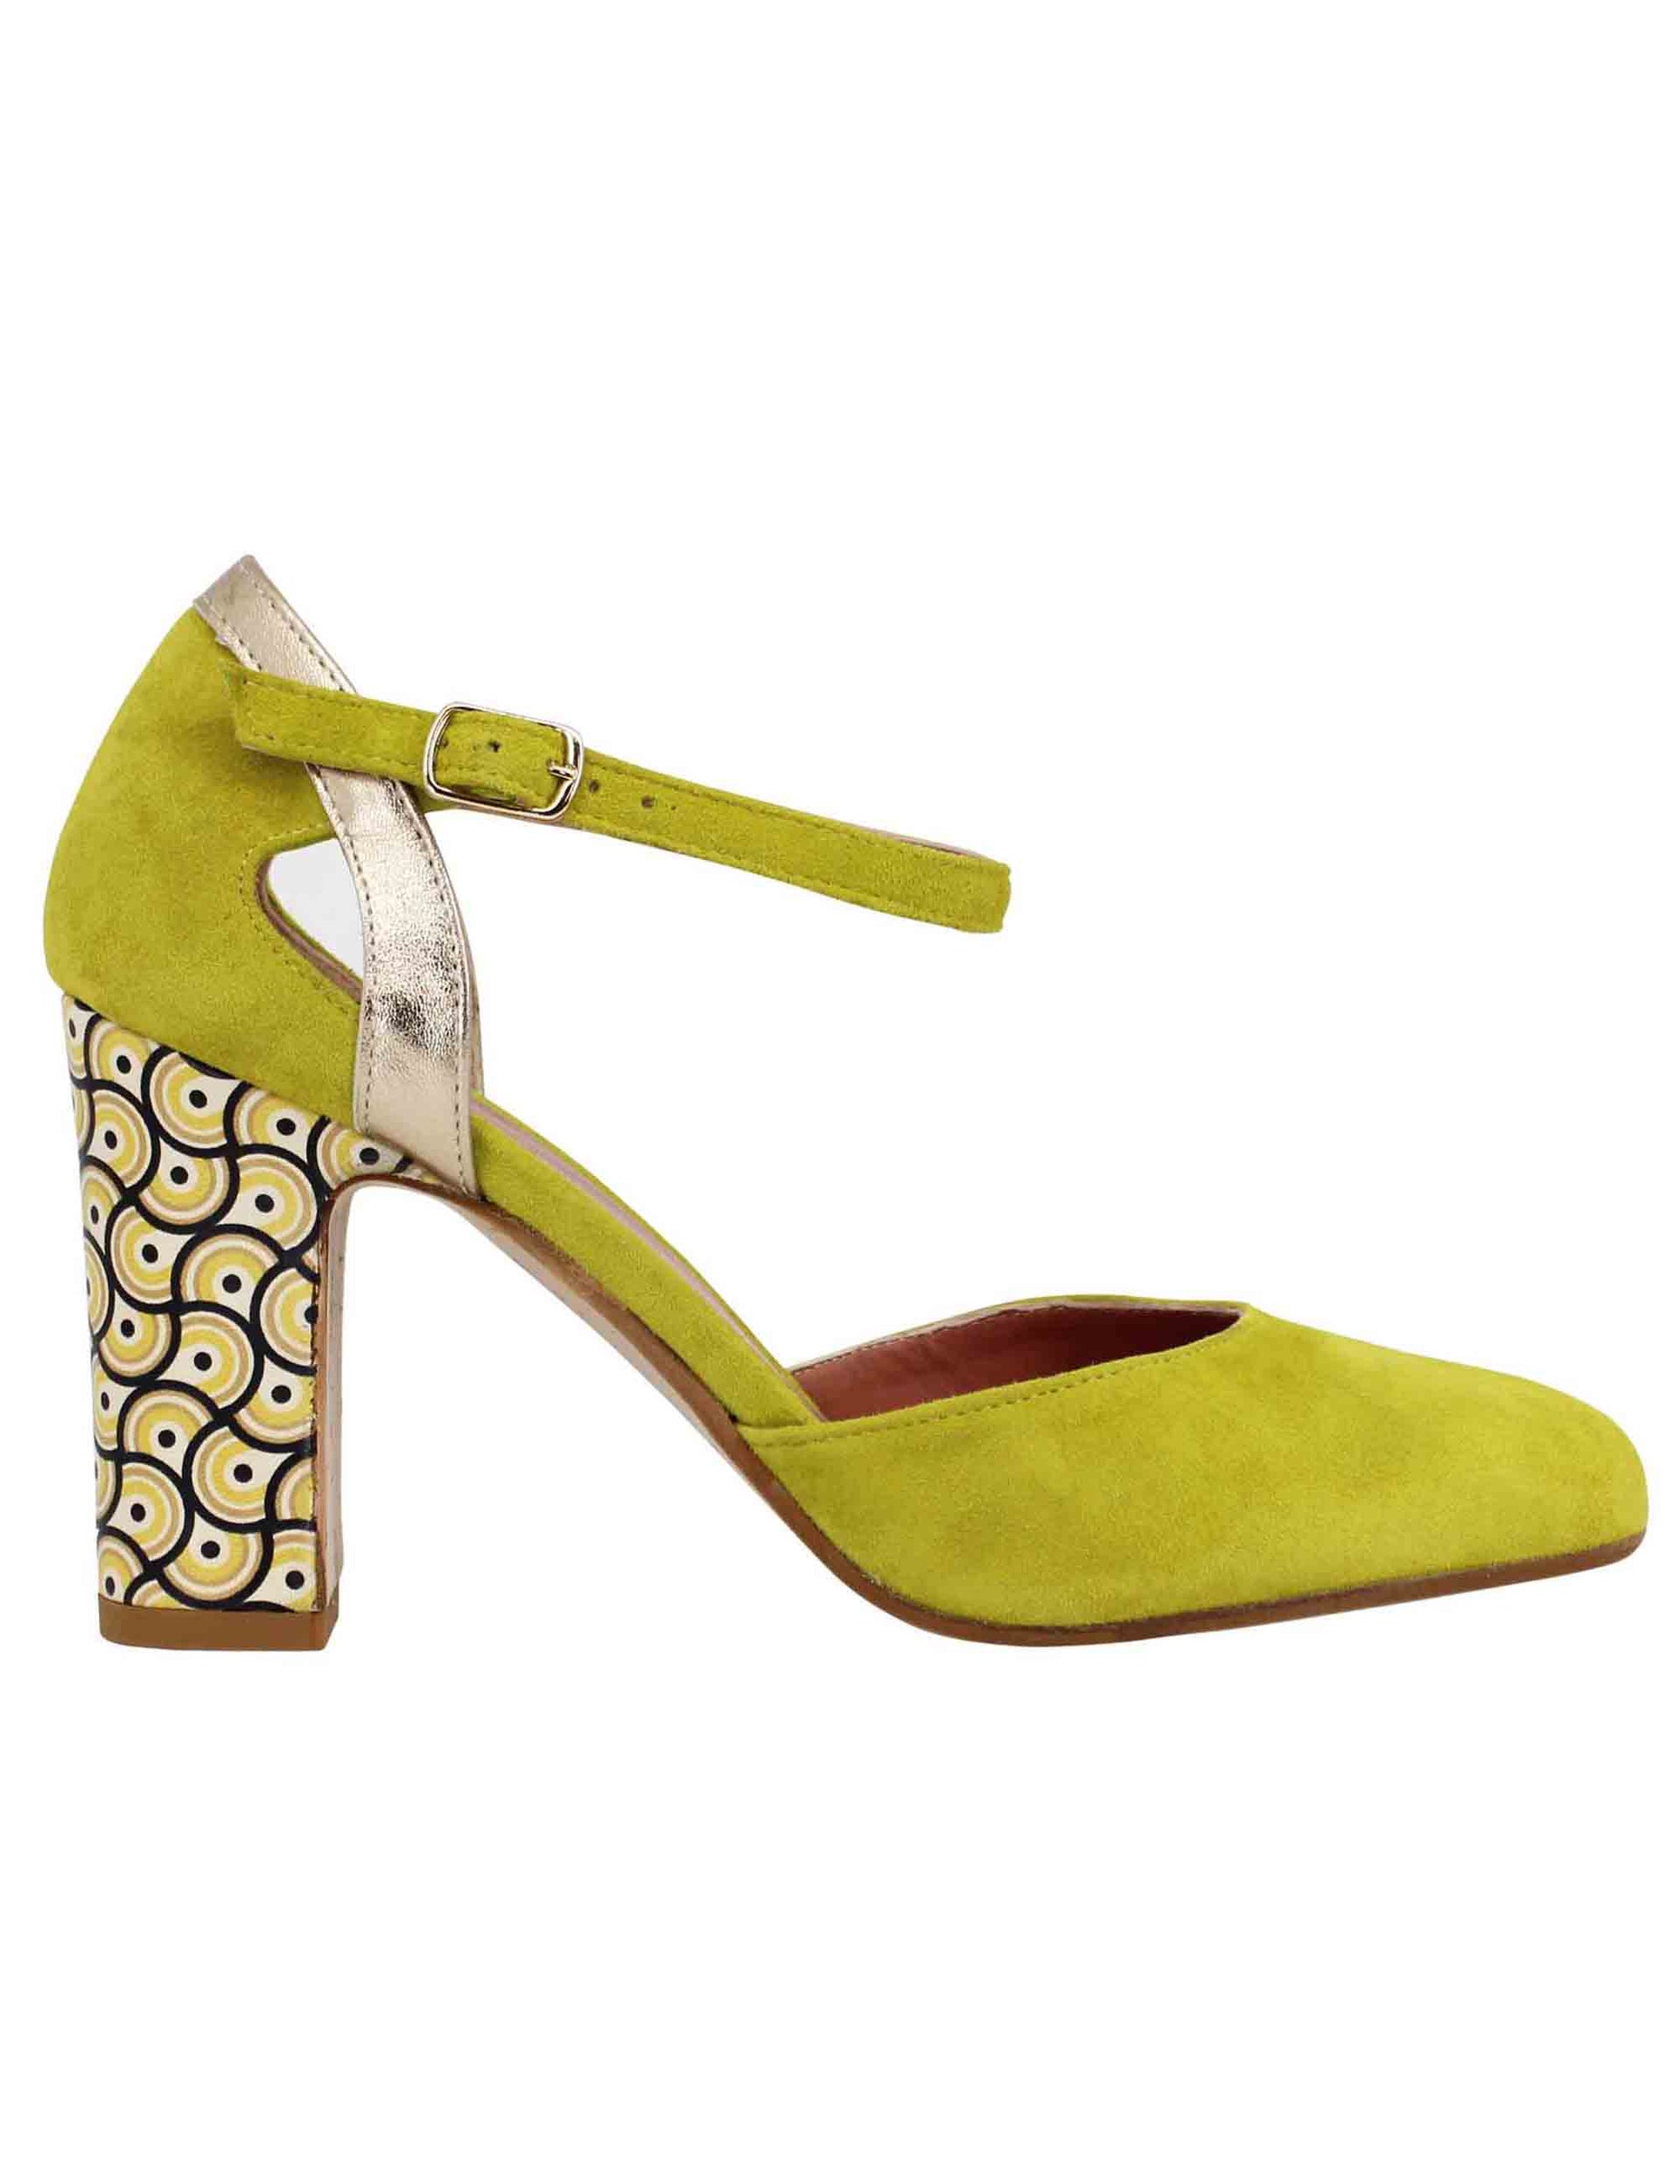 Women's green suede pumps with high heel and ankle strap